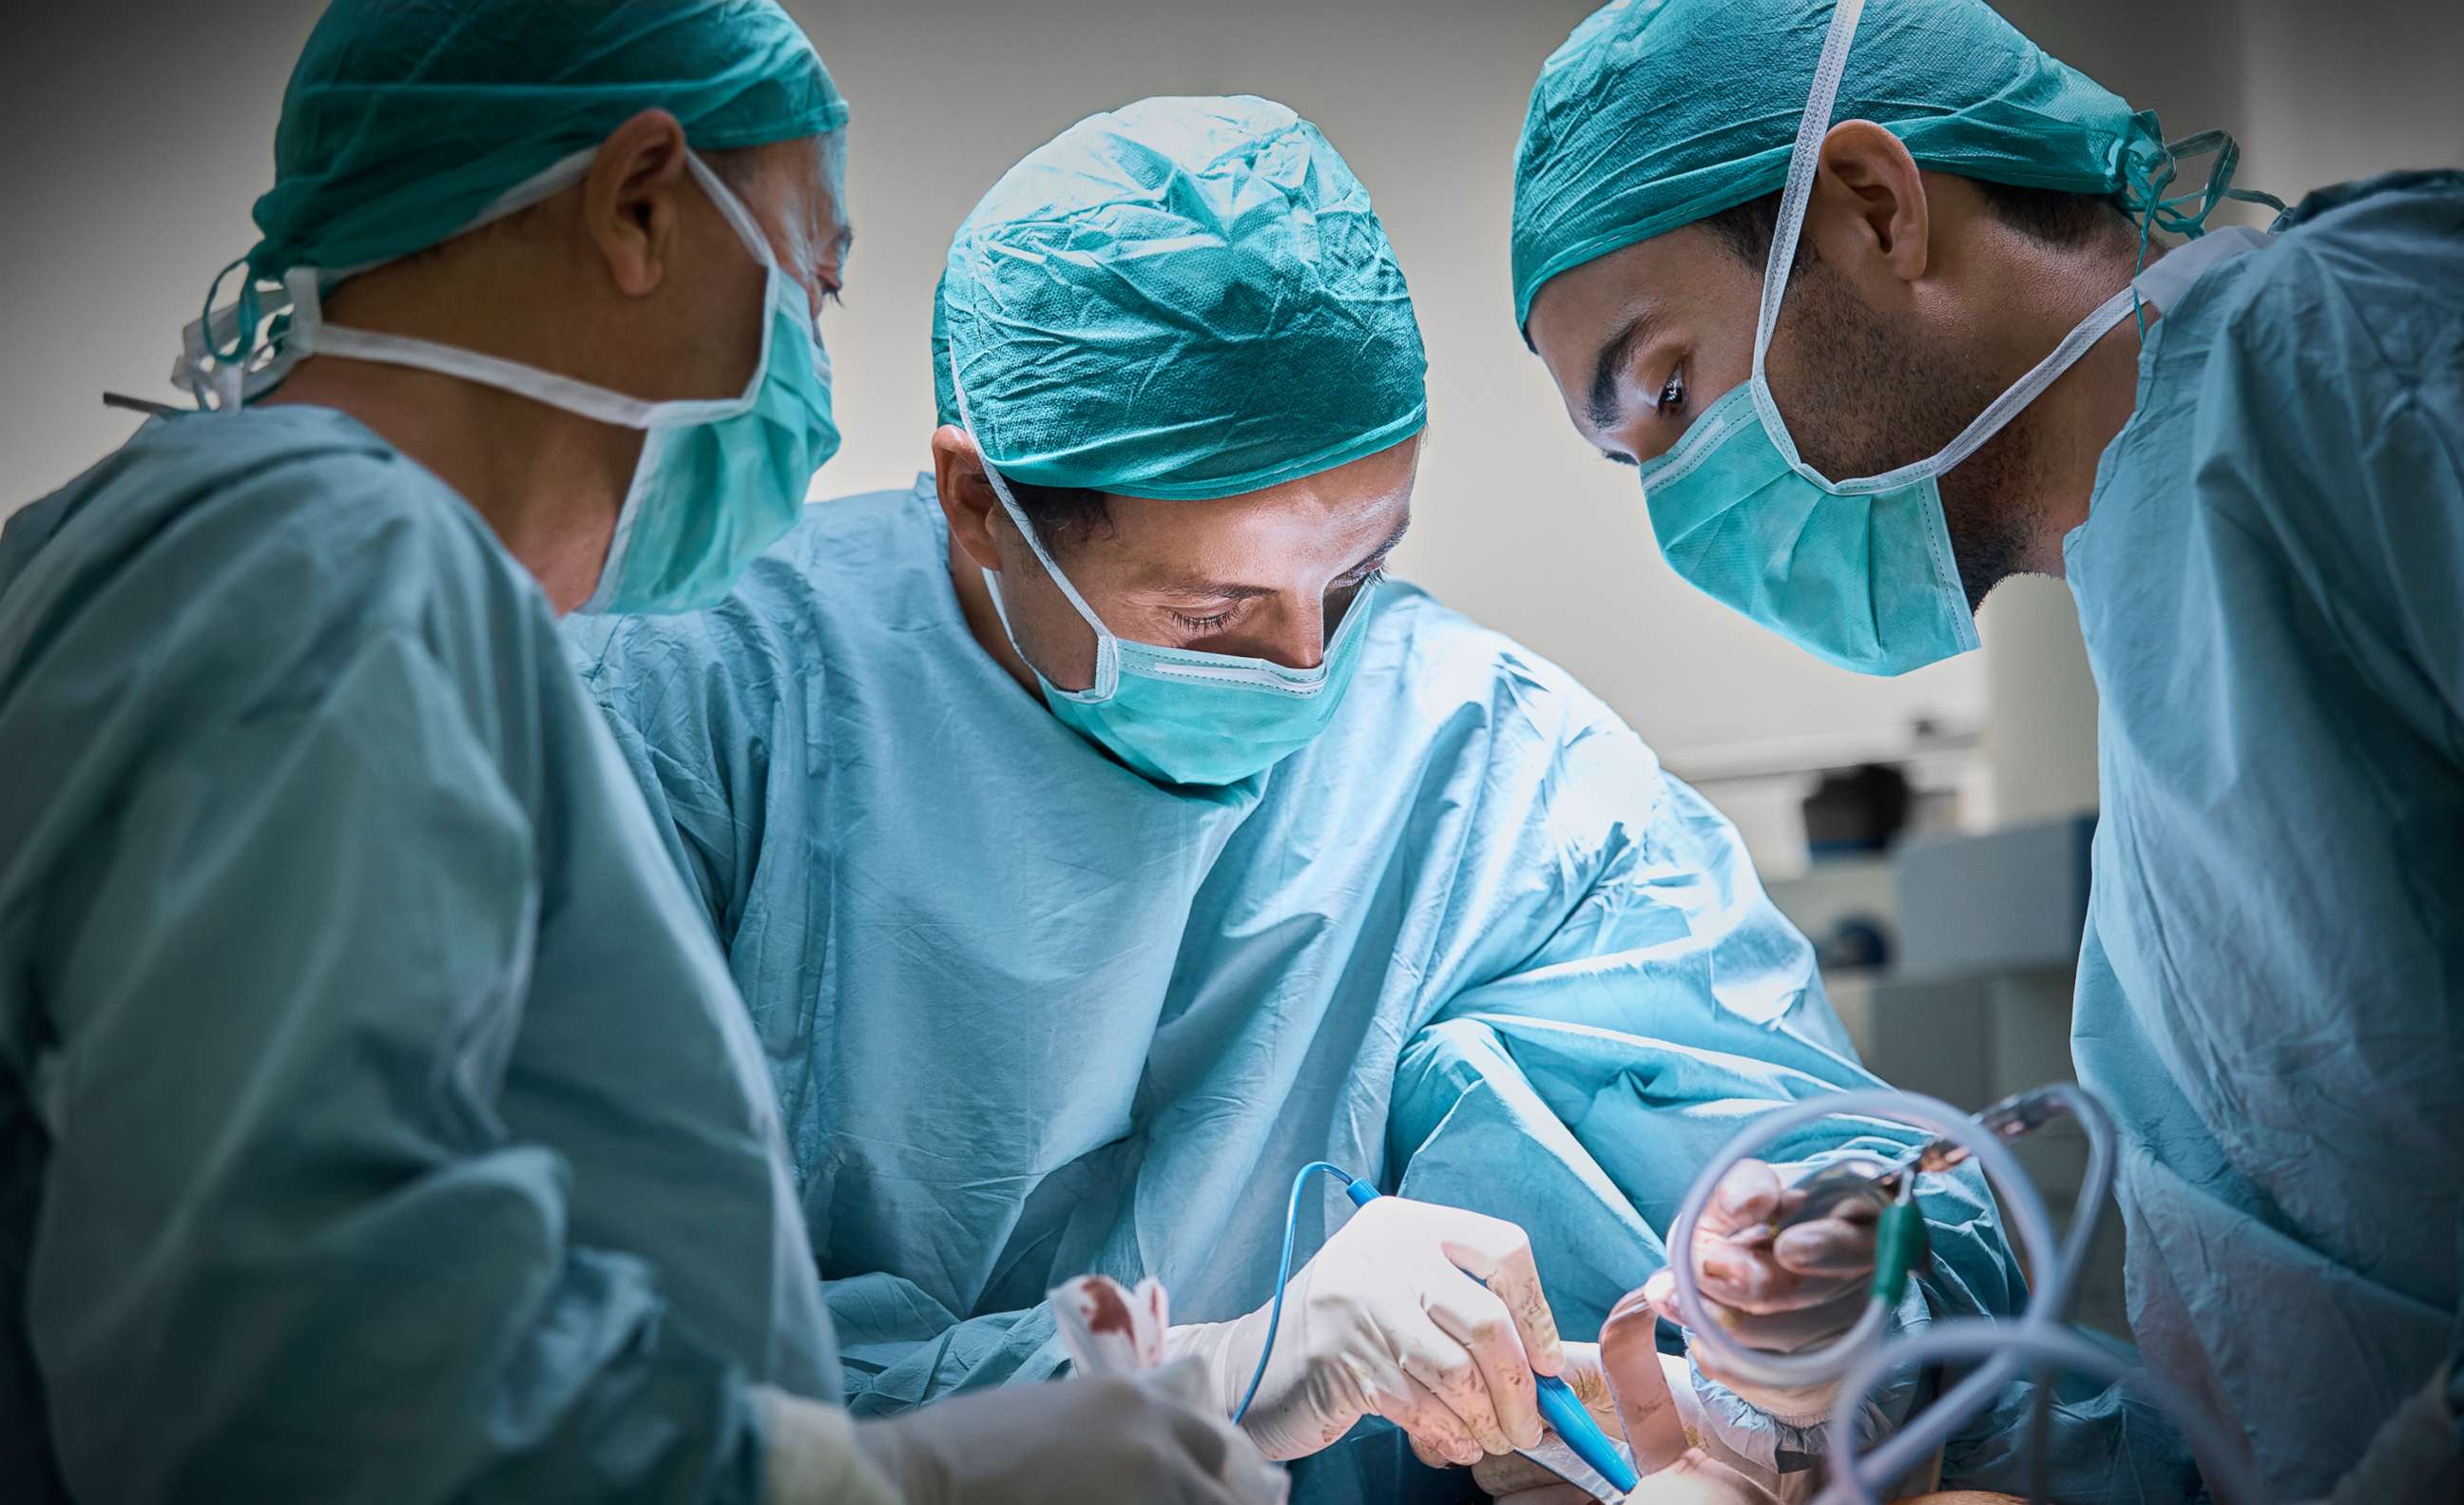 PHOTO: surgeons operate on a patient.